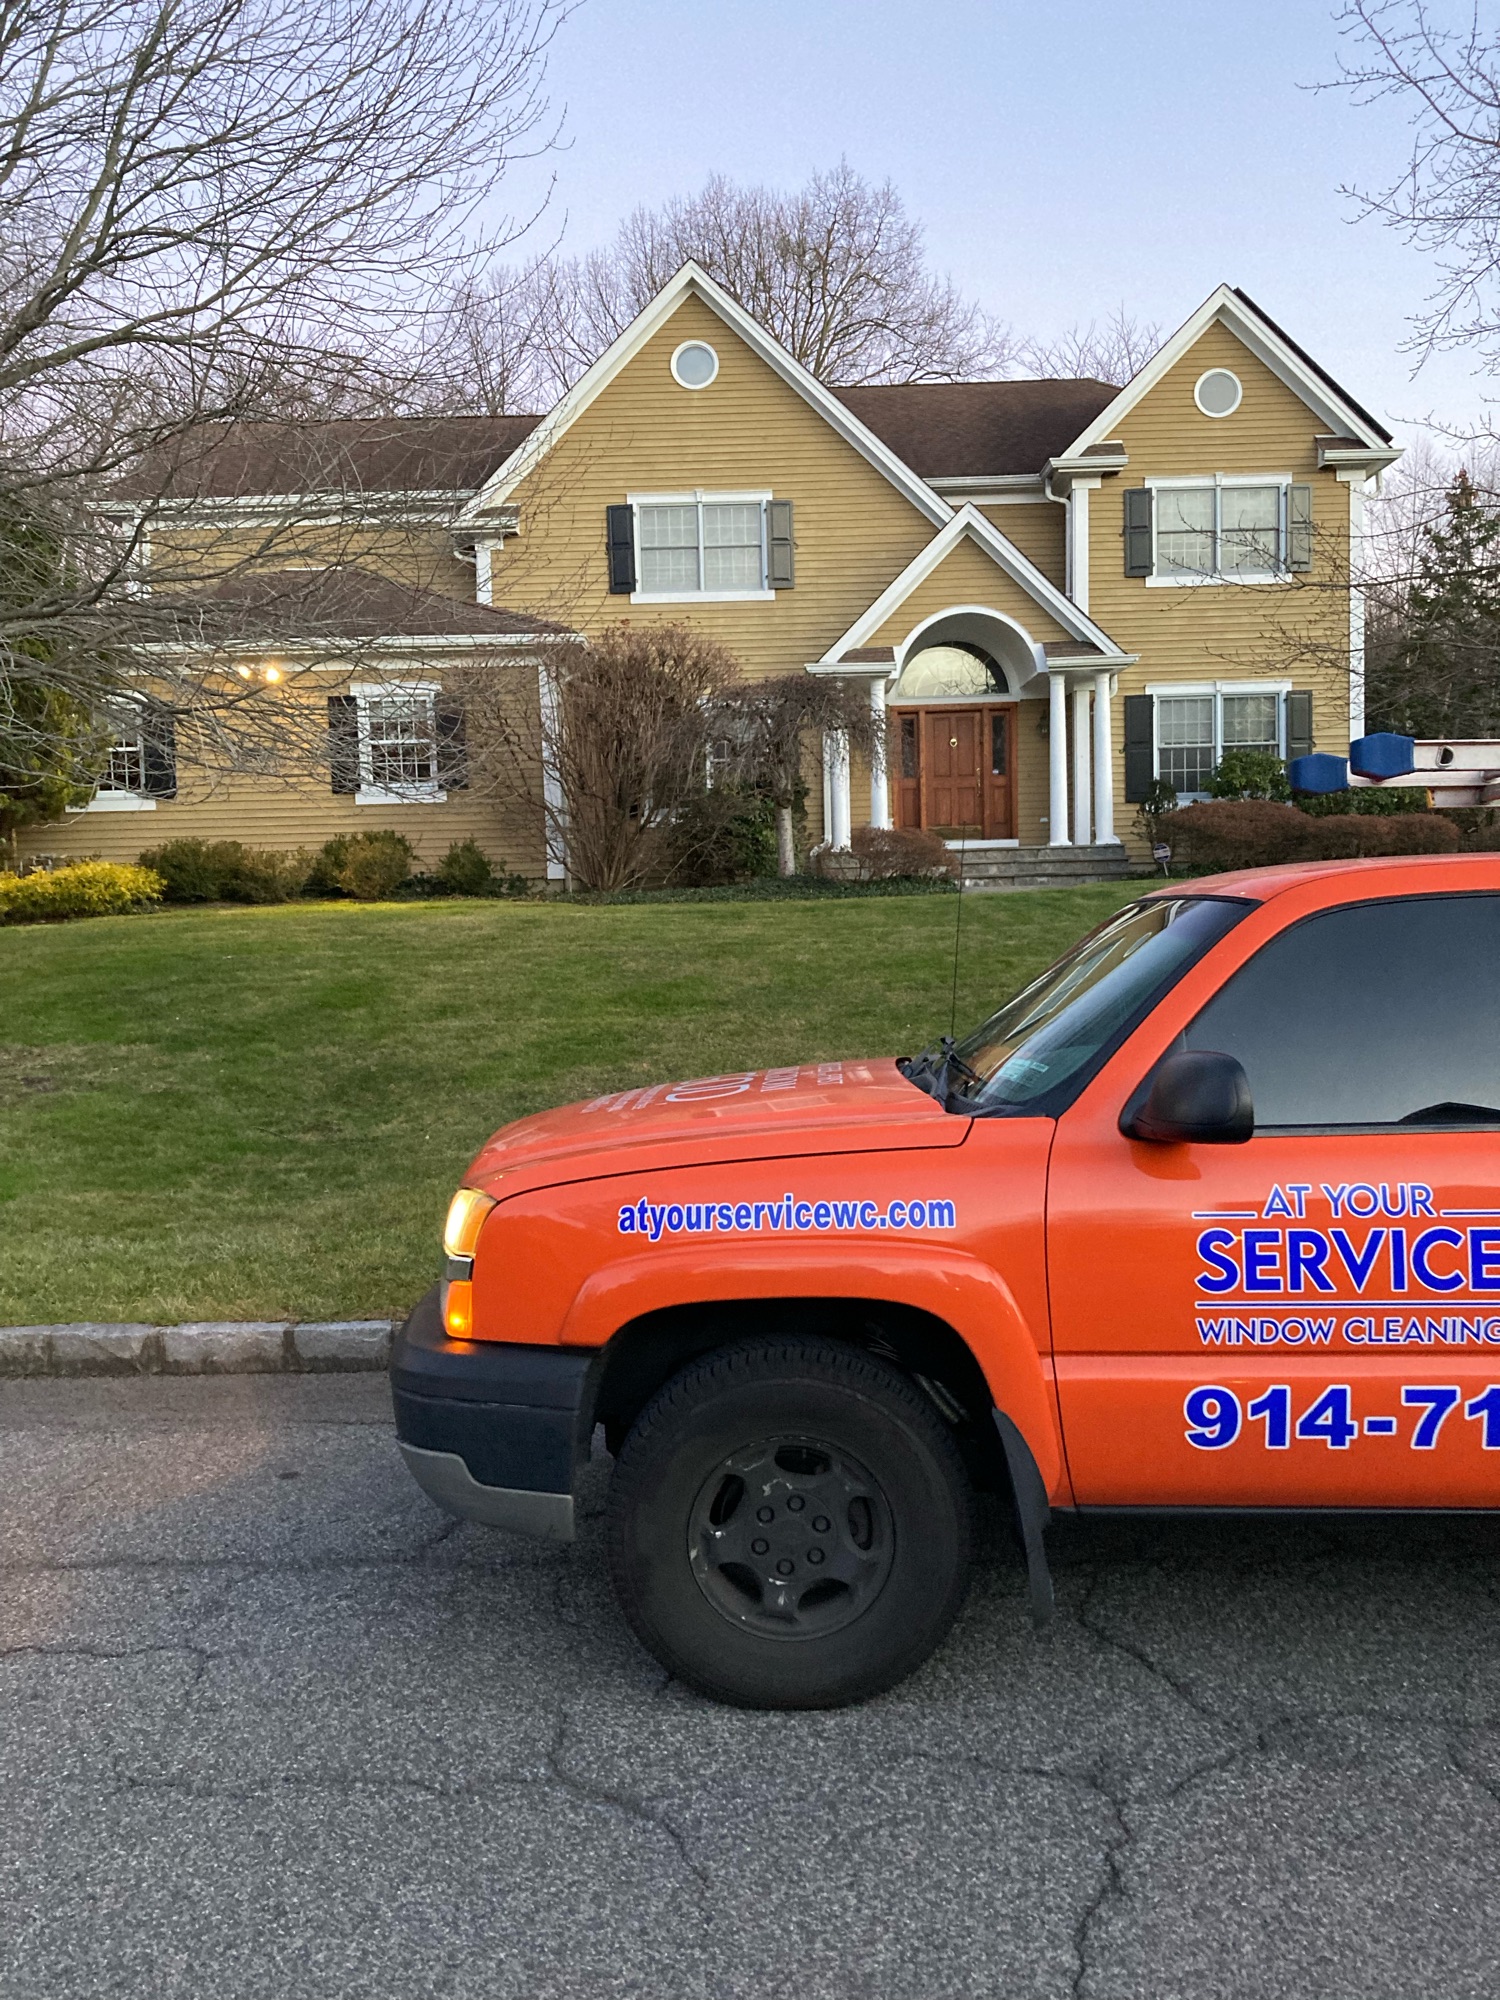 At Your Service Window Cleaning Logo